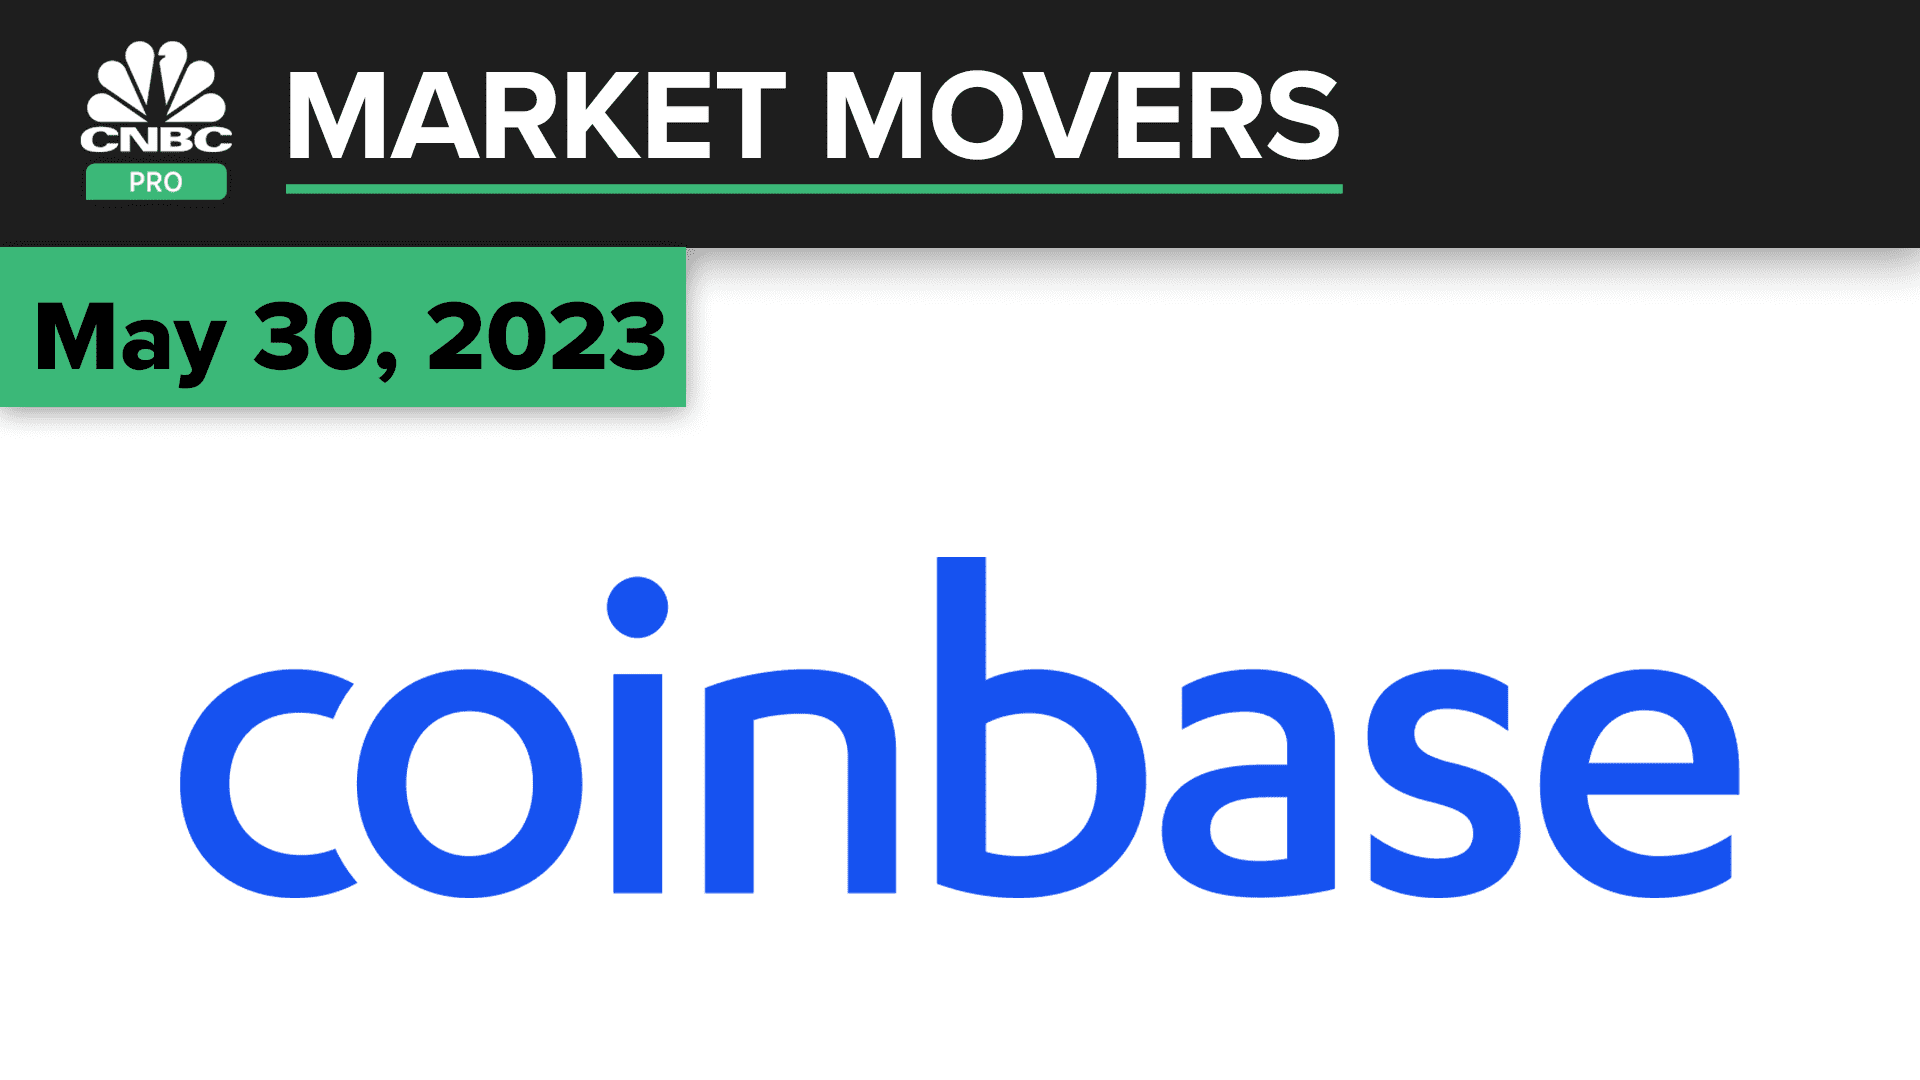 coinbase-stock-pops-after-analyst-upgrade.-here’s-how-the-pros-are-reacting